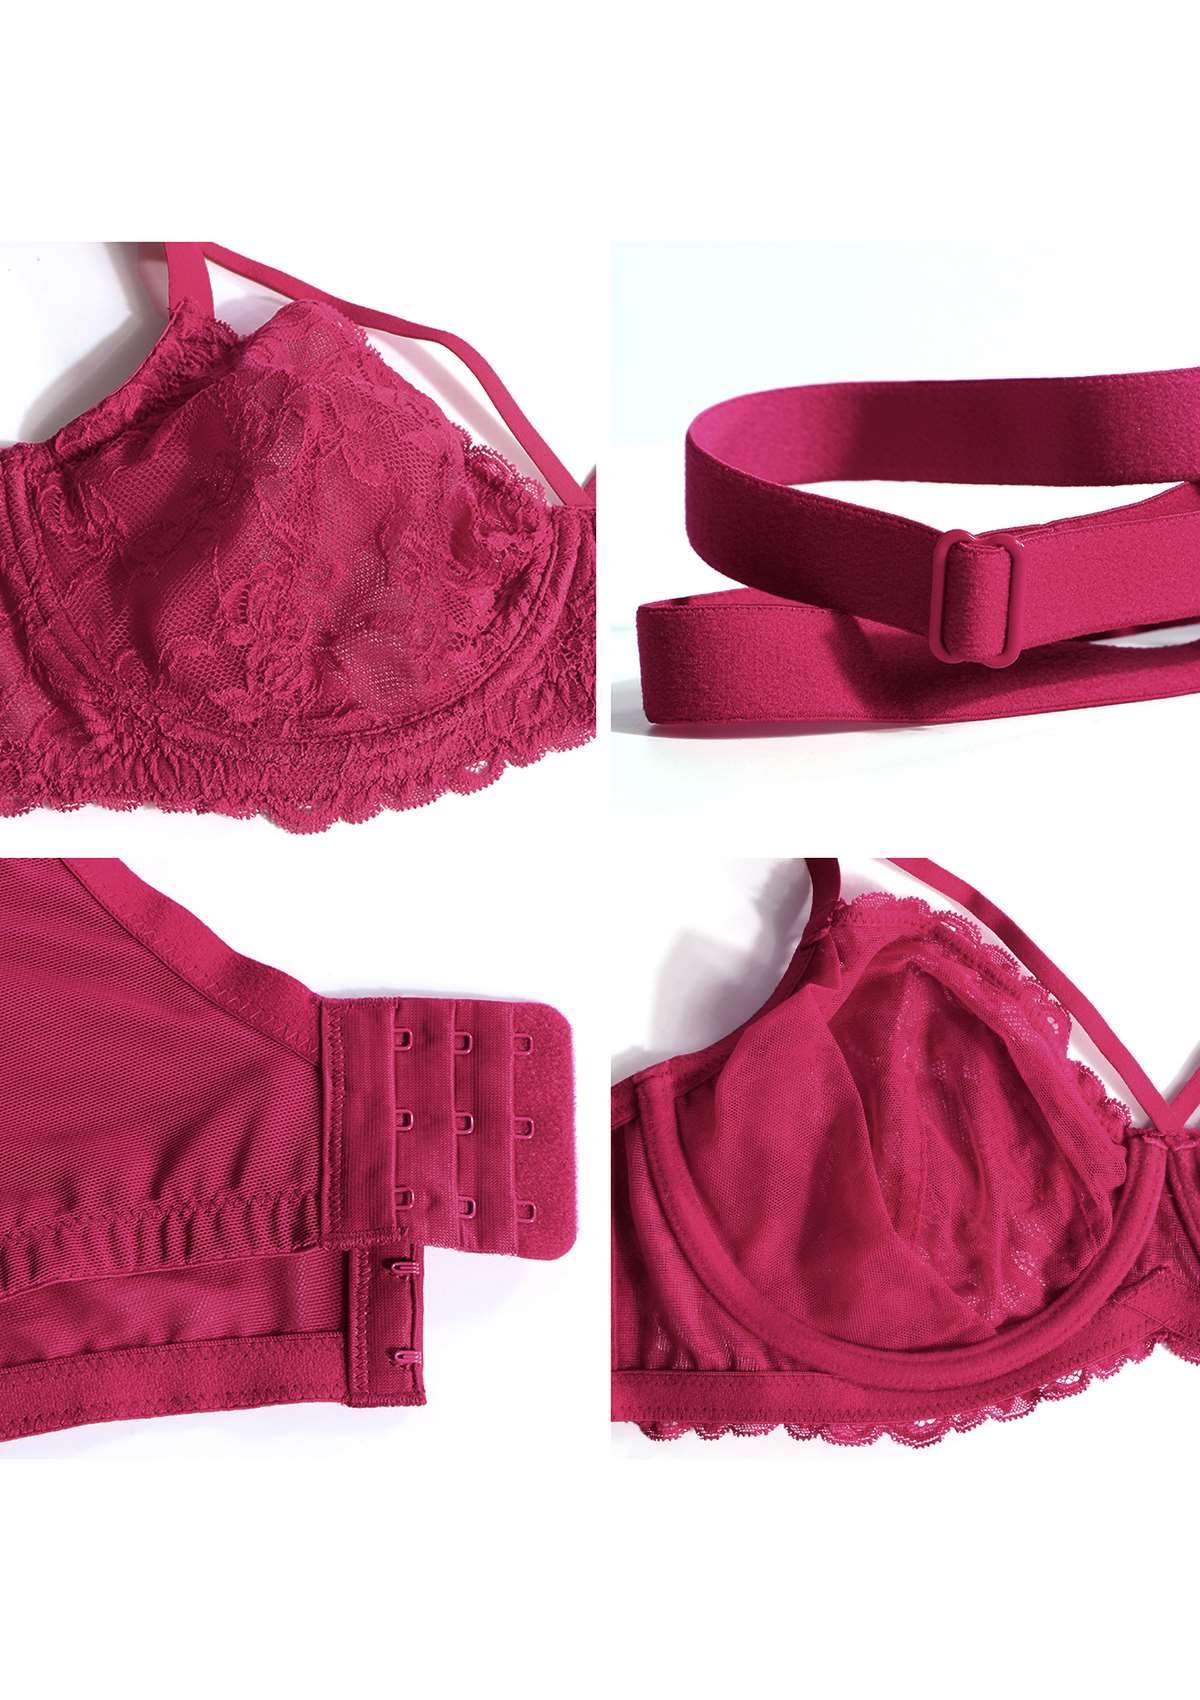 HSIA Pretty In Petals Sexy Lace Bra: Full Coverage Back Smoothing Bra - Red / 32 / DDD/F